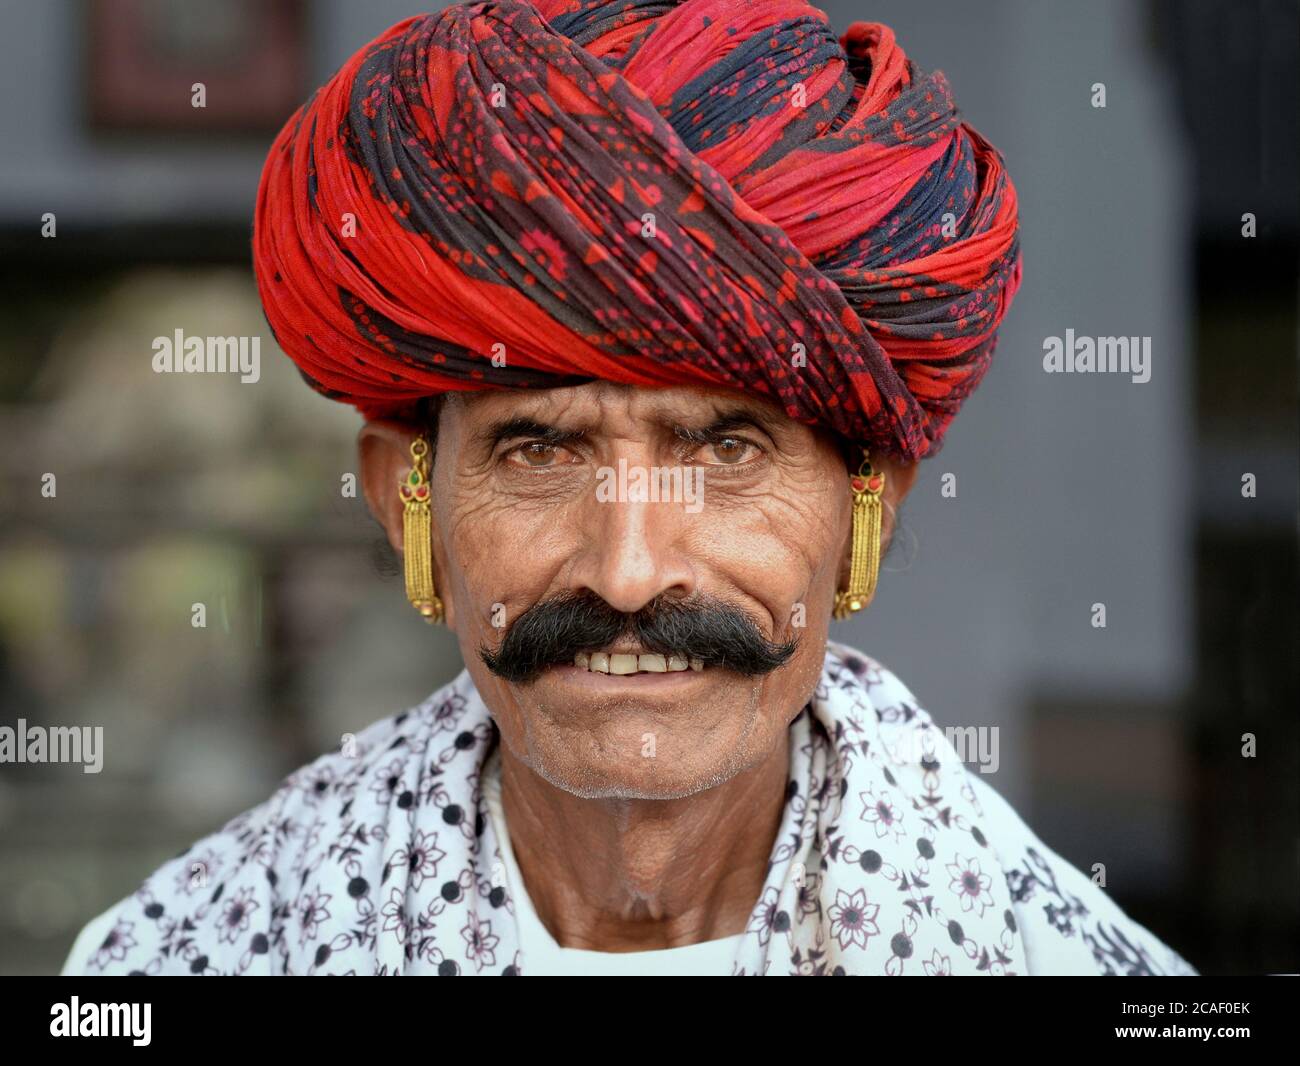 Indian Rajasthani man with black moustache, red-and-black turban and gold earrings poses for the camera. Stock Photo